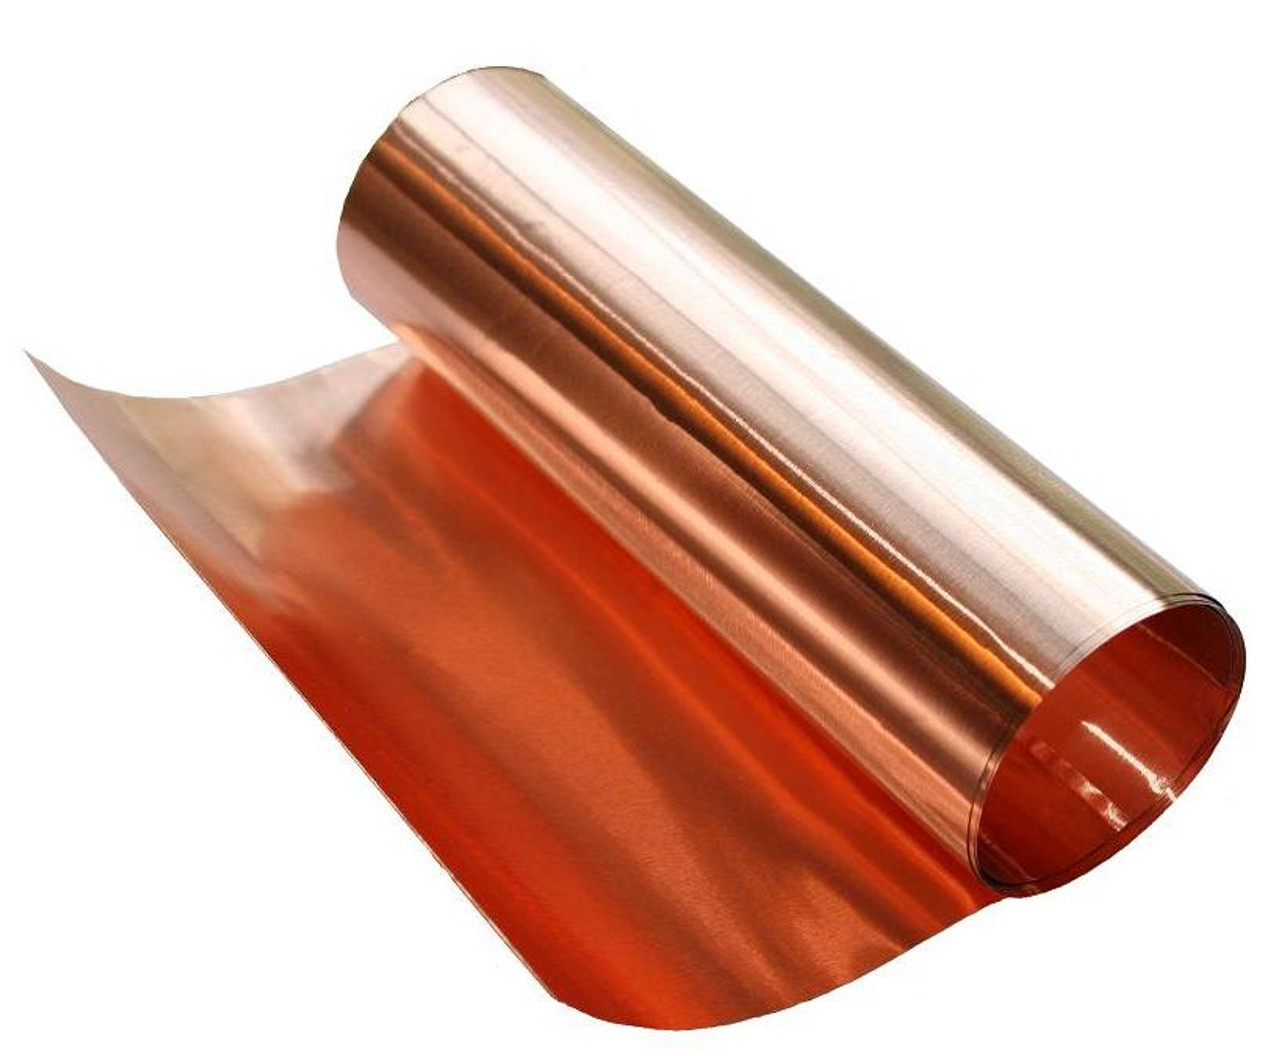 Global Metals: Supplier of Aluminum, Brass, and Copper semi finished  products and finished parts in non-ferrous alloys